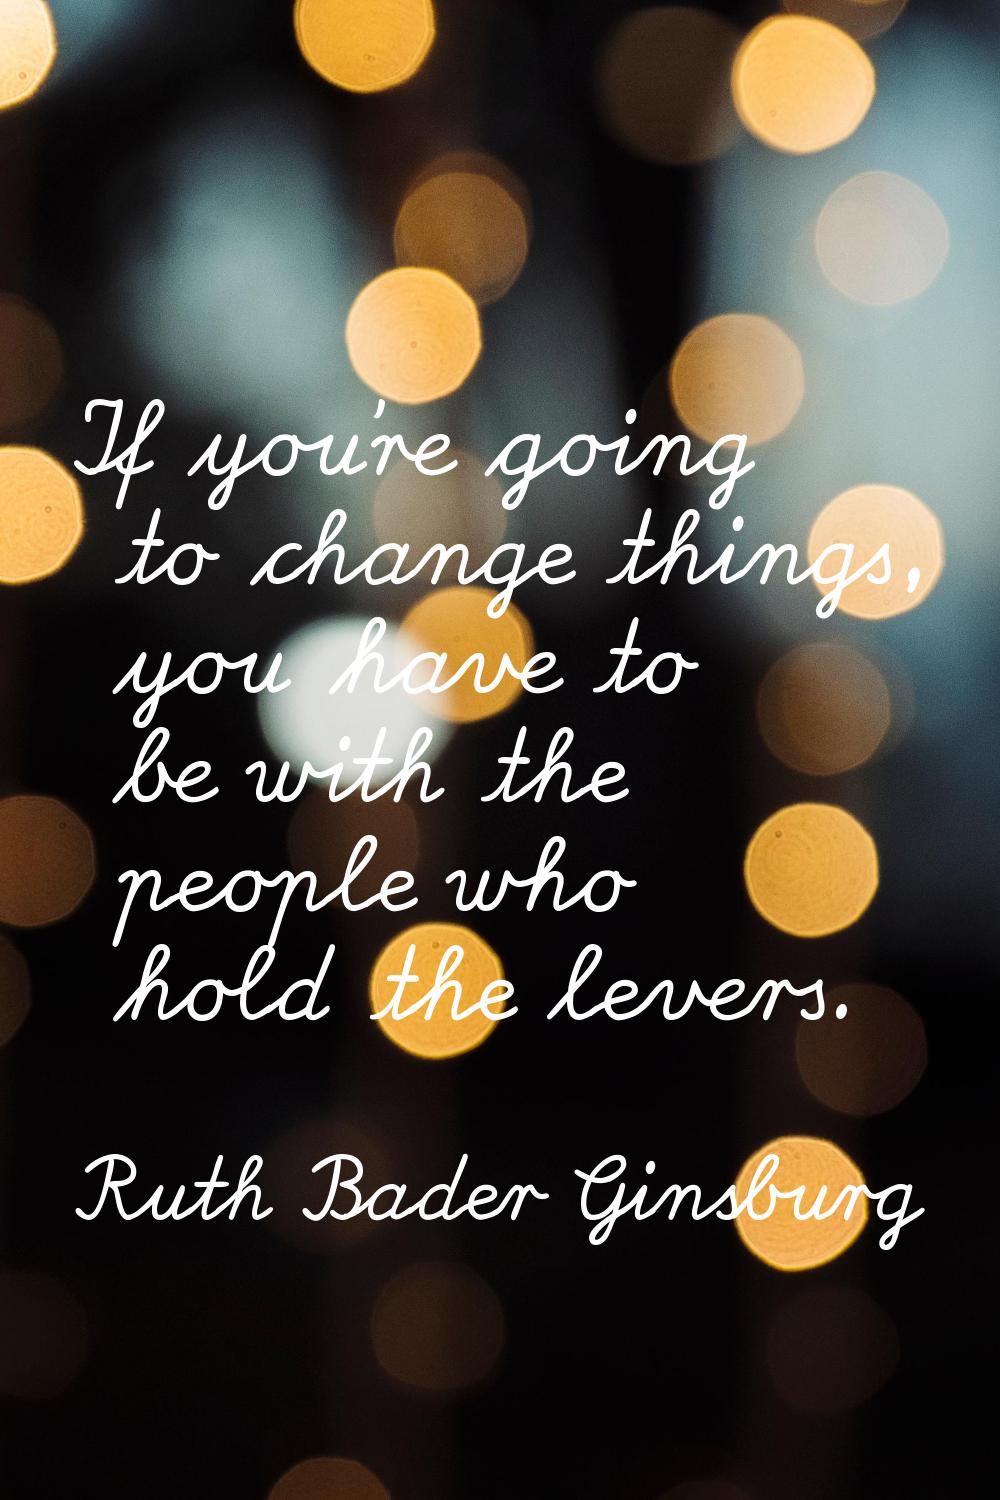 If you're going to change things, you have to be with the people who hold the levers.